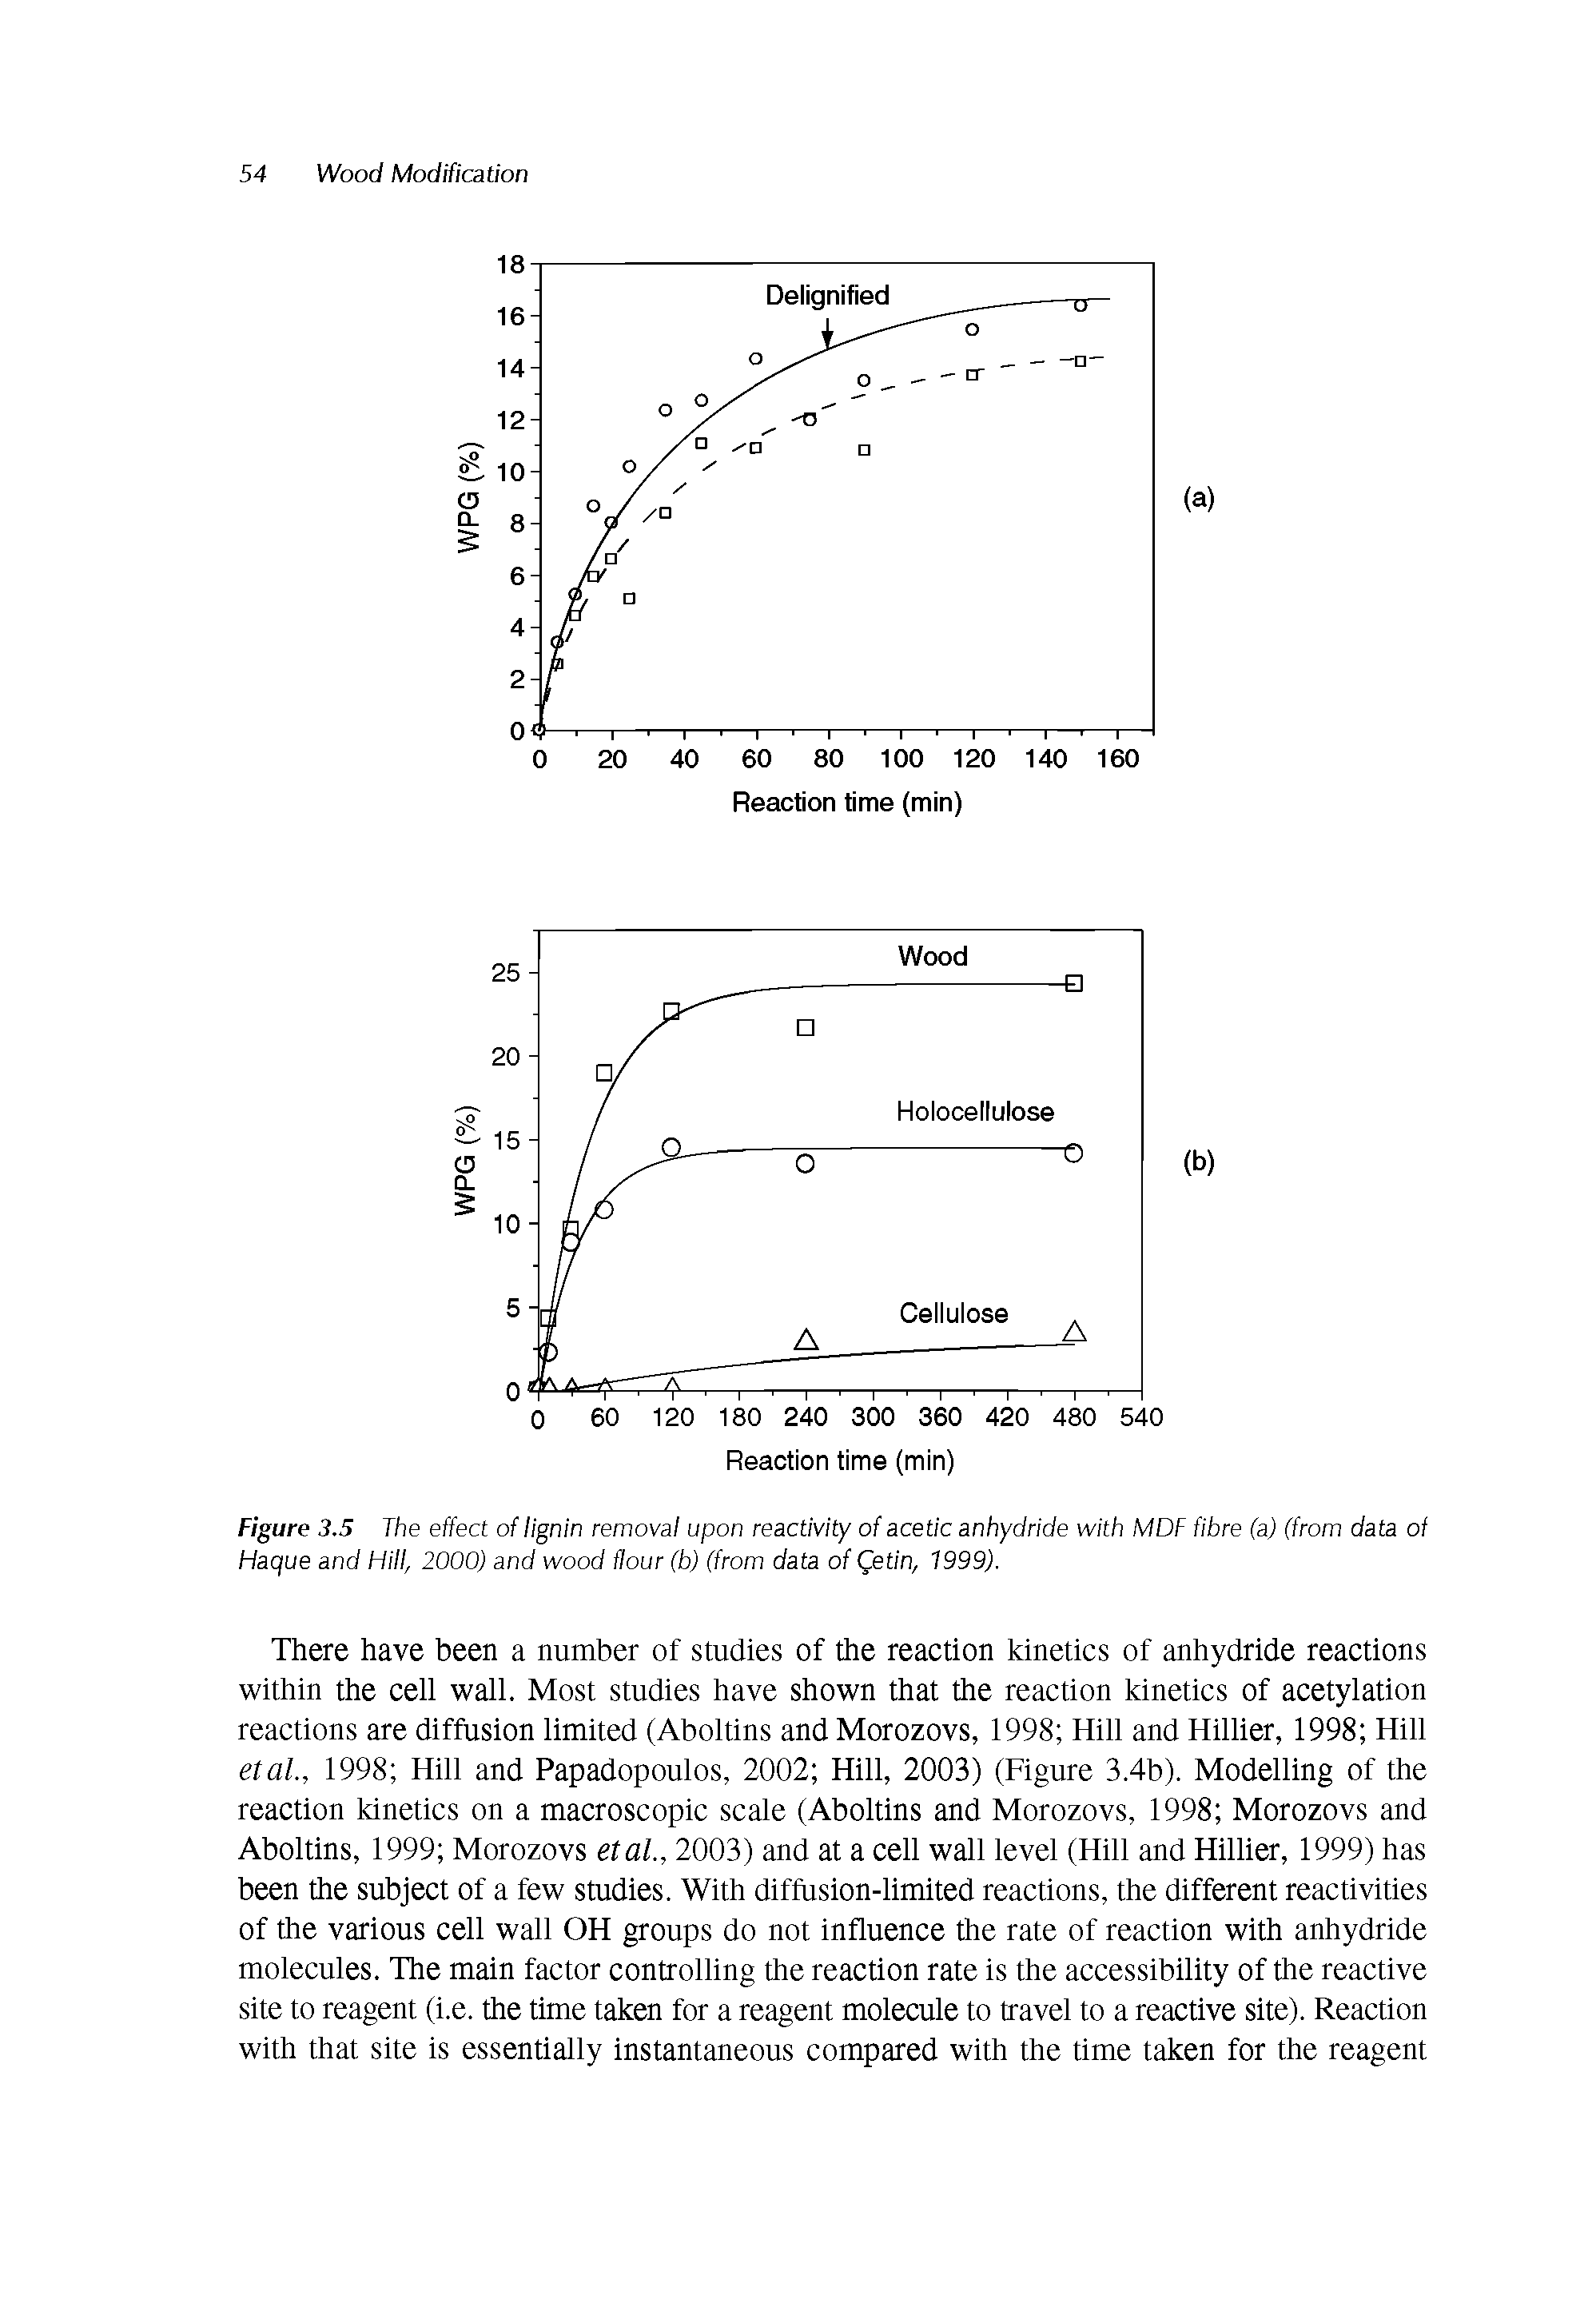 Figure 3.5 The effect of lignin removal upon reactivity of acetic anhydride with MDF fibre (a) (from data of Hague and ffill, 2000) and wood flour (b) (from data of ( etin, 1999).